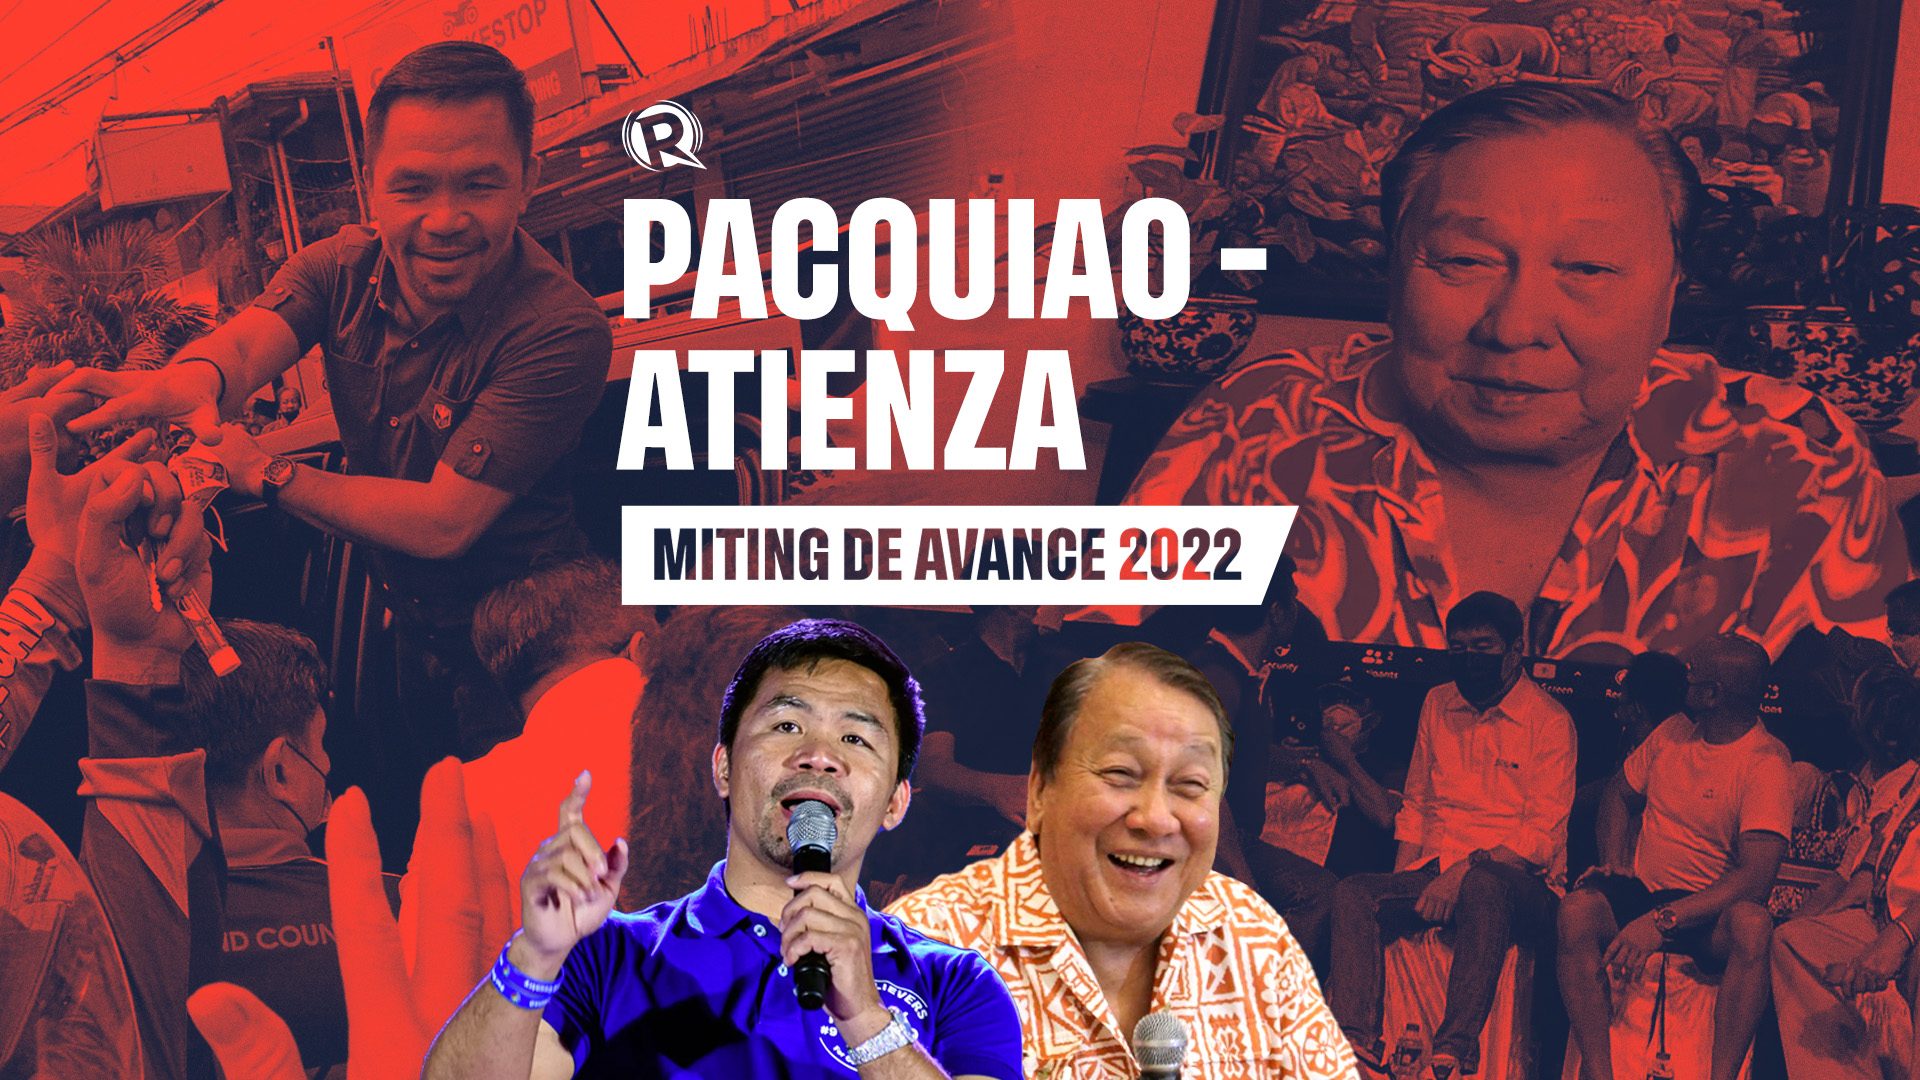 HIGHLIGHTS: Pacquiao-Atienza miting de avance – 2022 Philippine elections